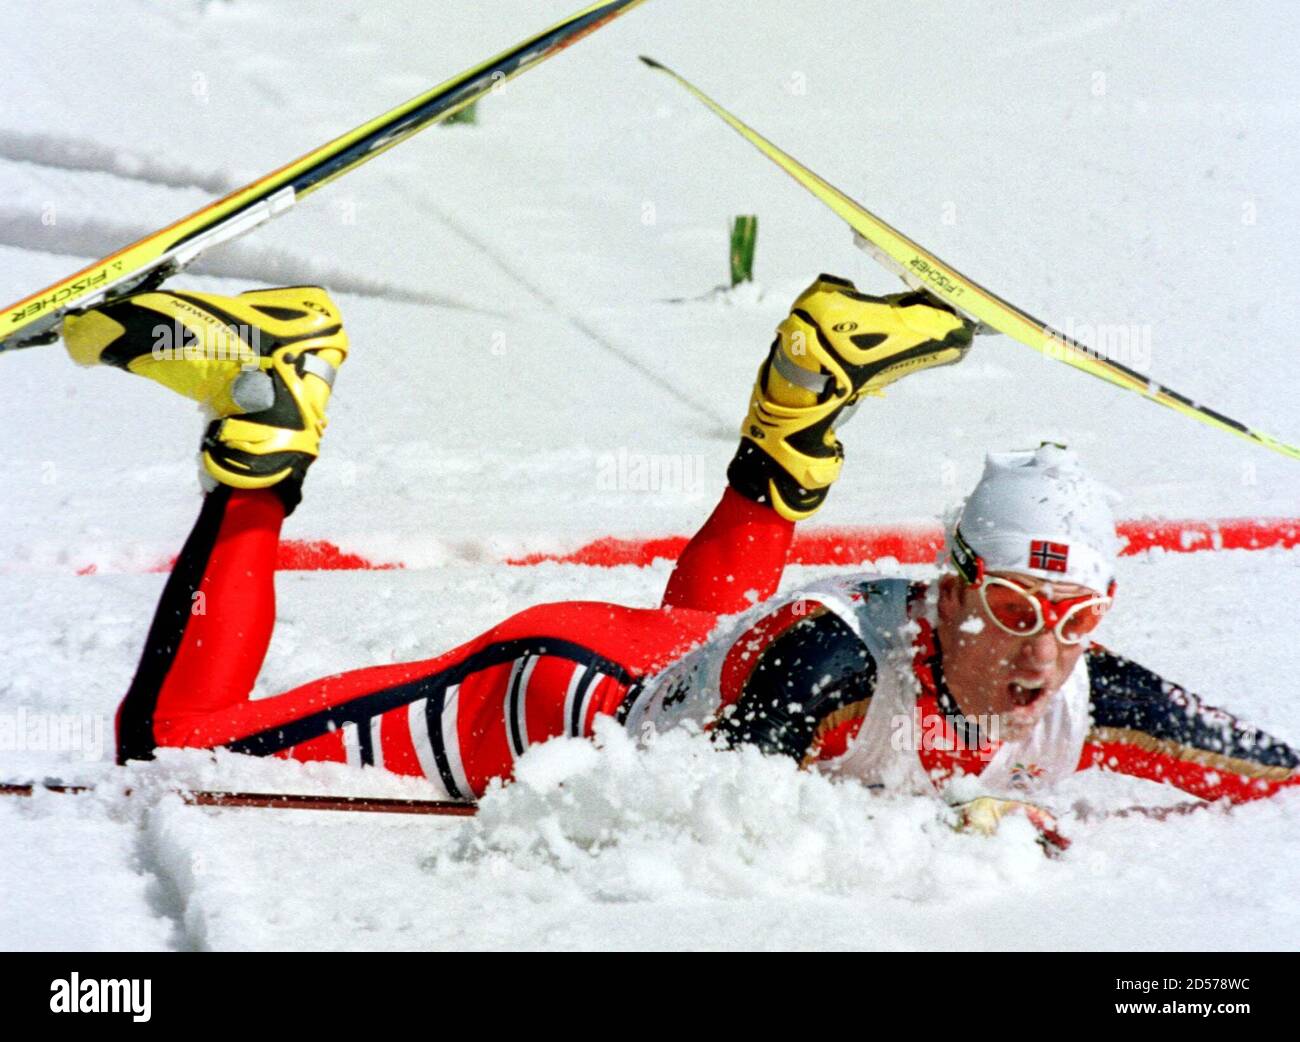 Norway's Bjoern Daehlie lies in the snow after crossing the finish line to  win his third Nagano Olympic gold medal in the men's Olympic 50 km  cross-country freestyle race February 22. Daehlie,